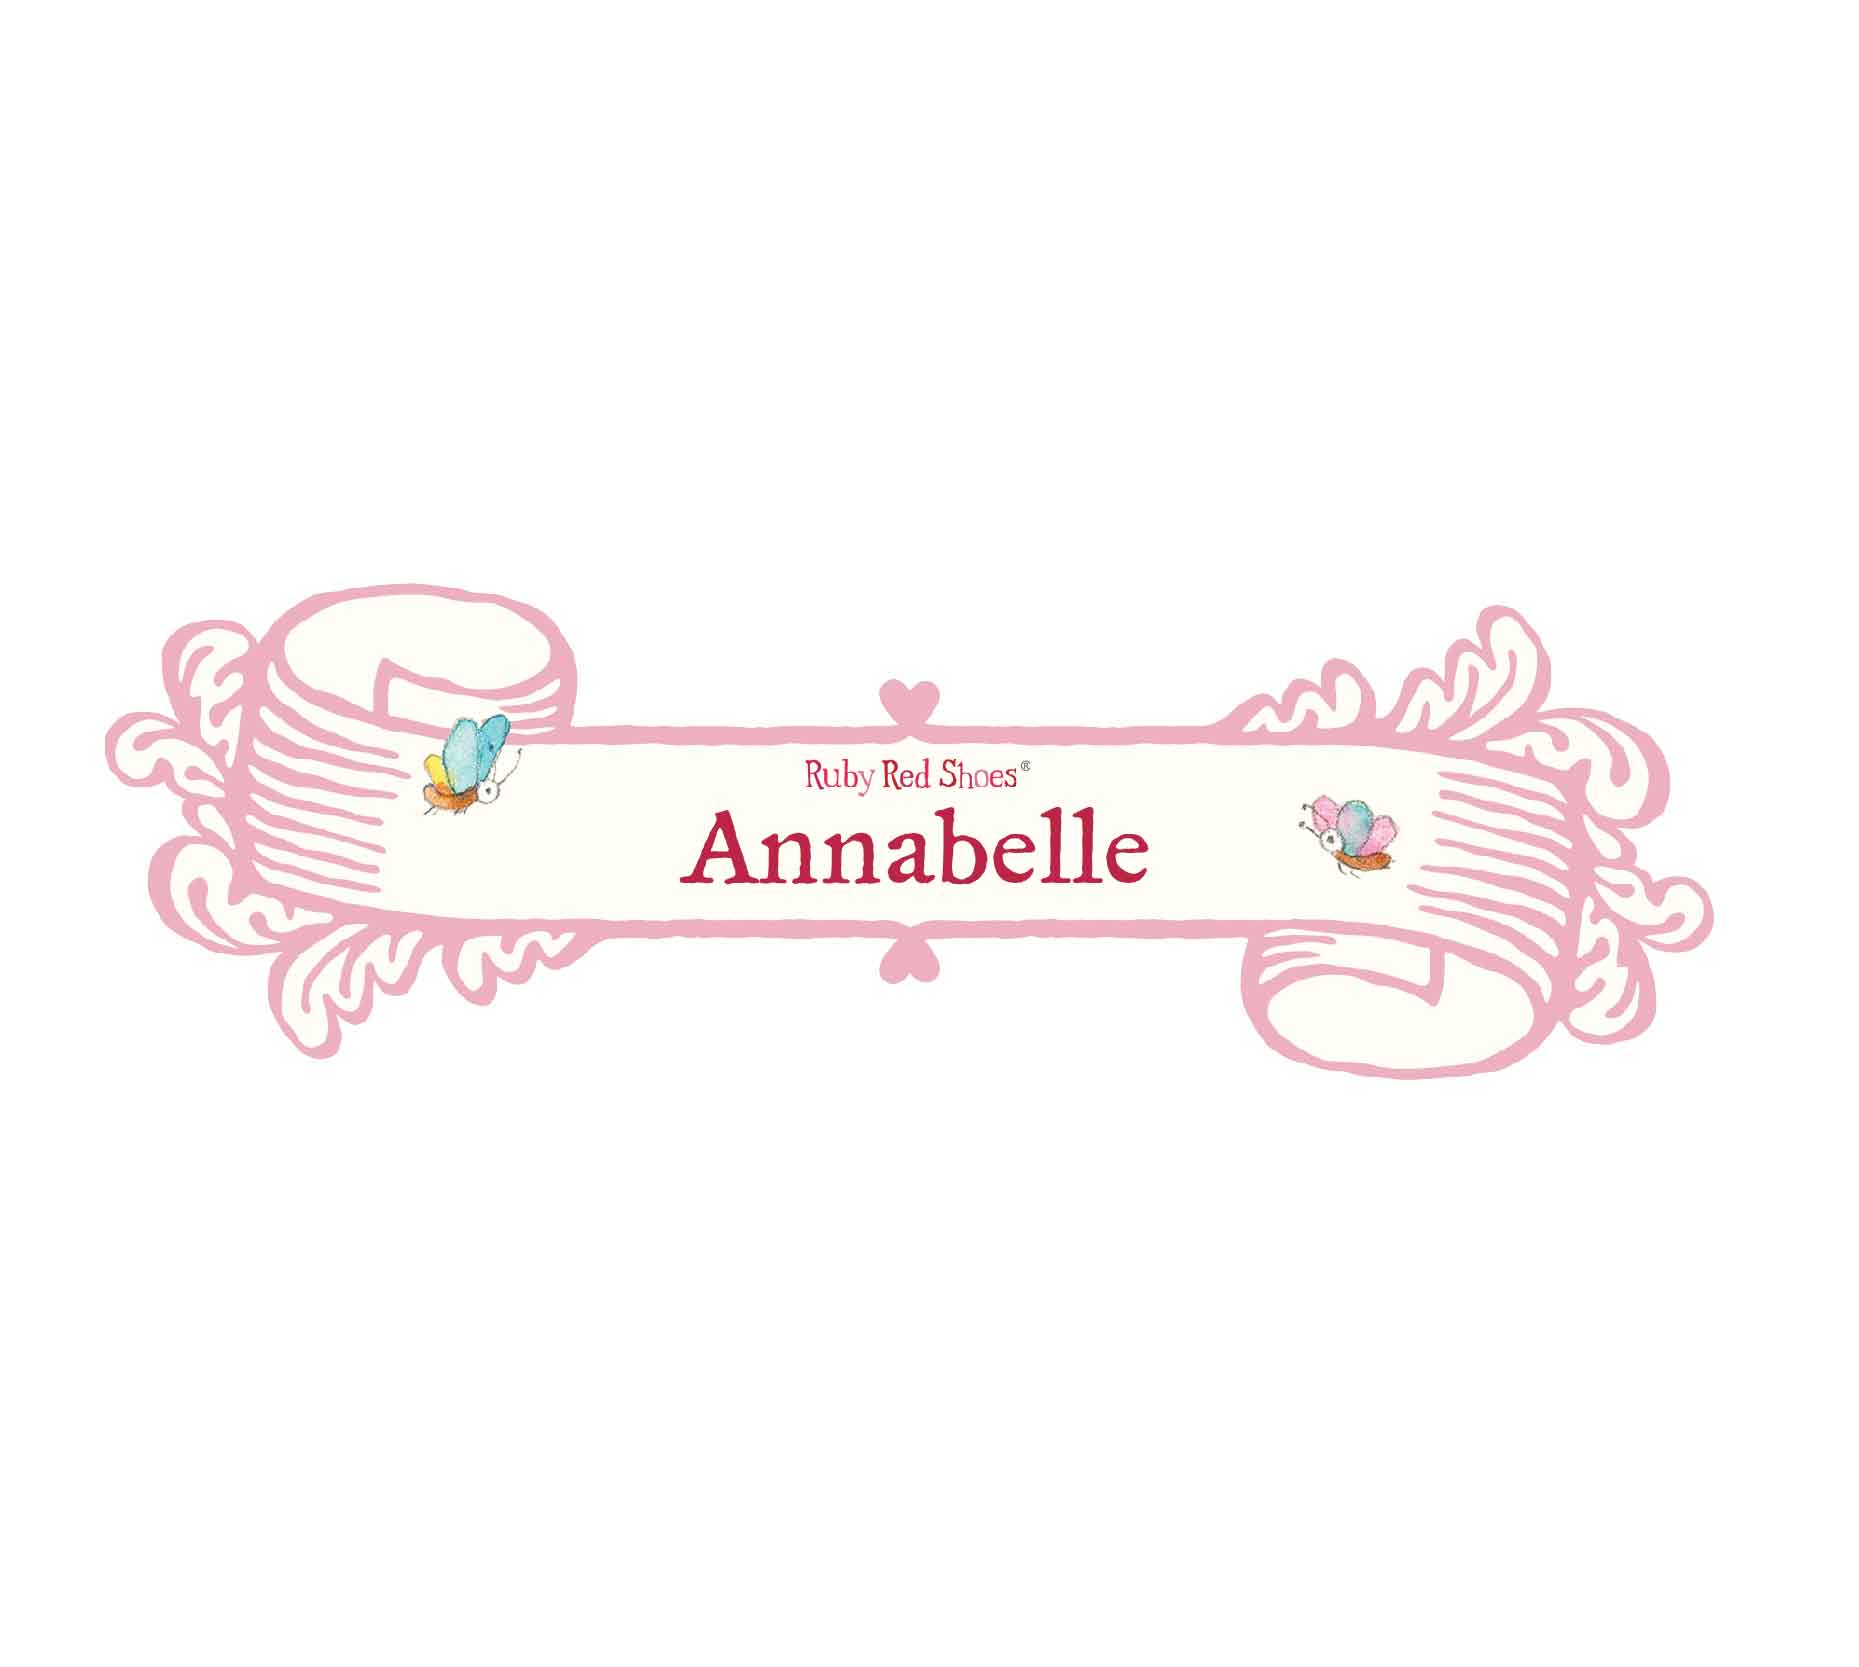 Ruby Red Shoes Name Banner in Pink with two butterflies, and the example name of "Annabelle" in a Dark Raspberry.